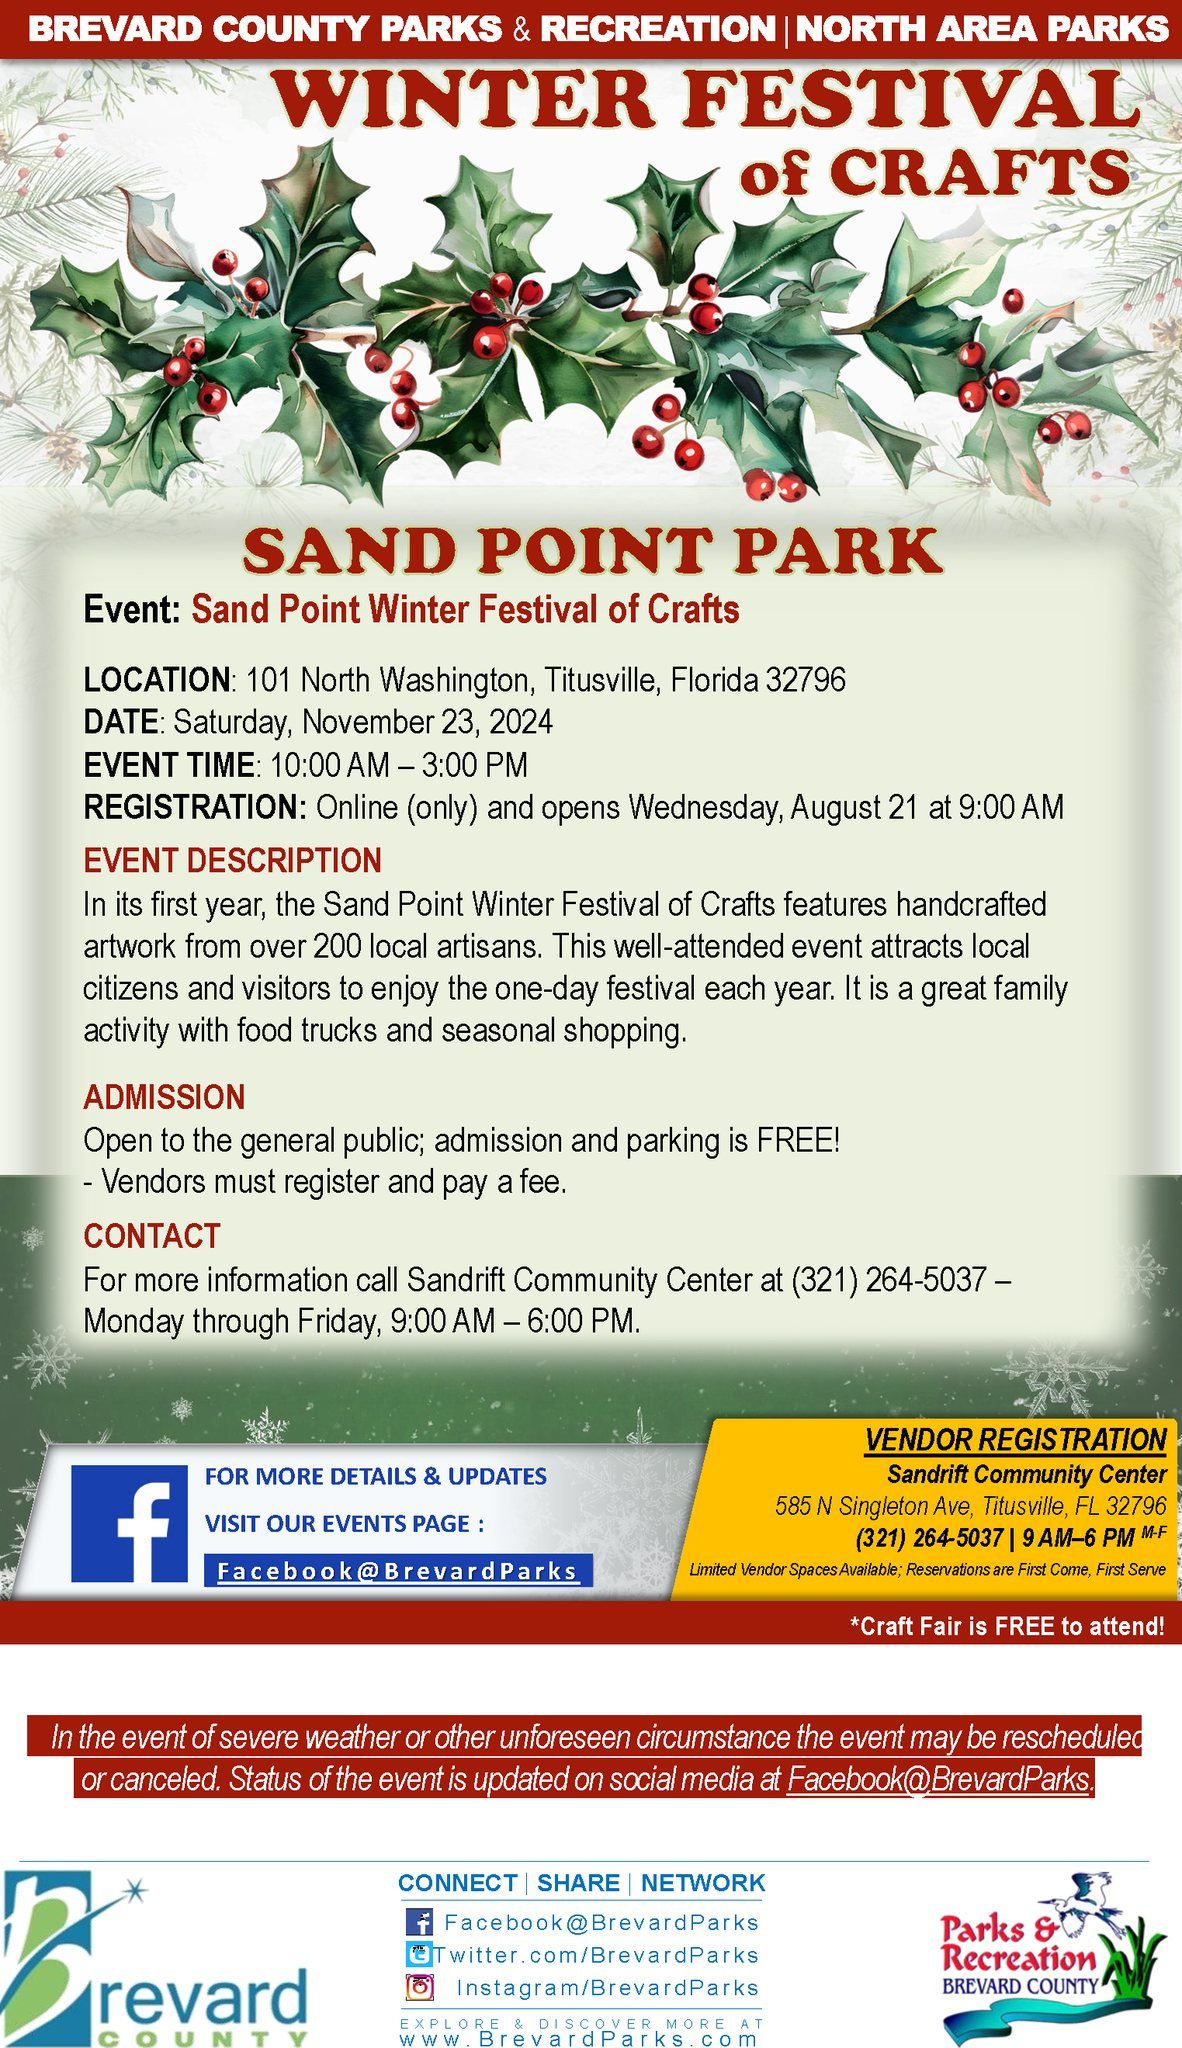 Winter Festival of Crafts at Sand Point Park